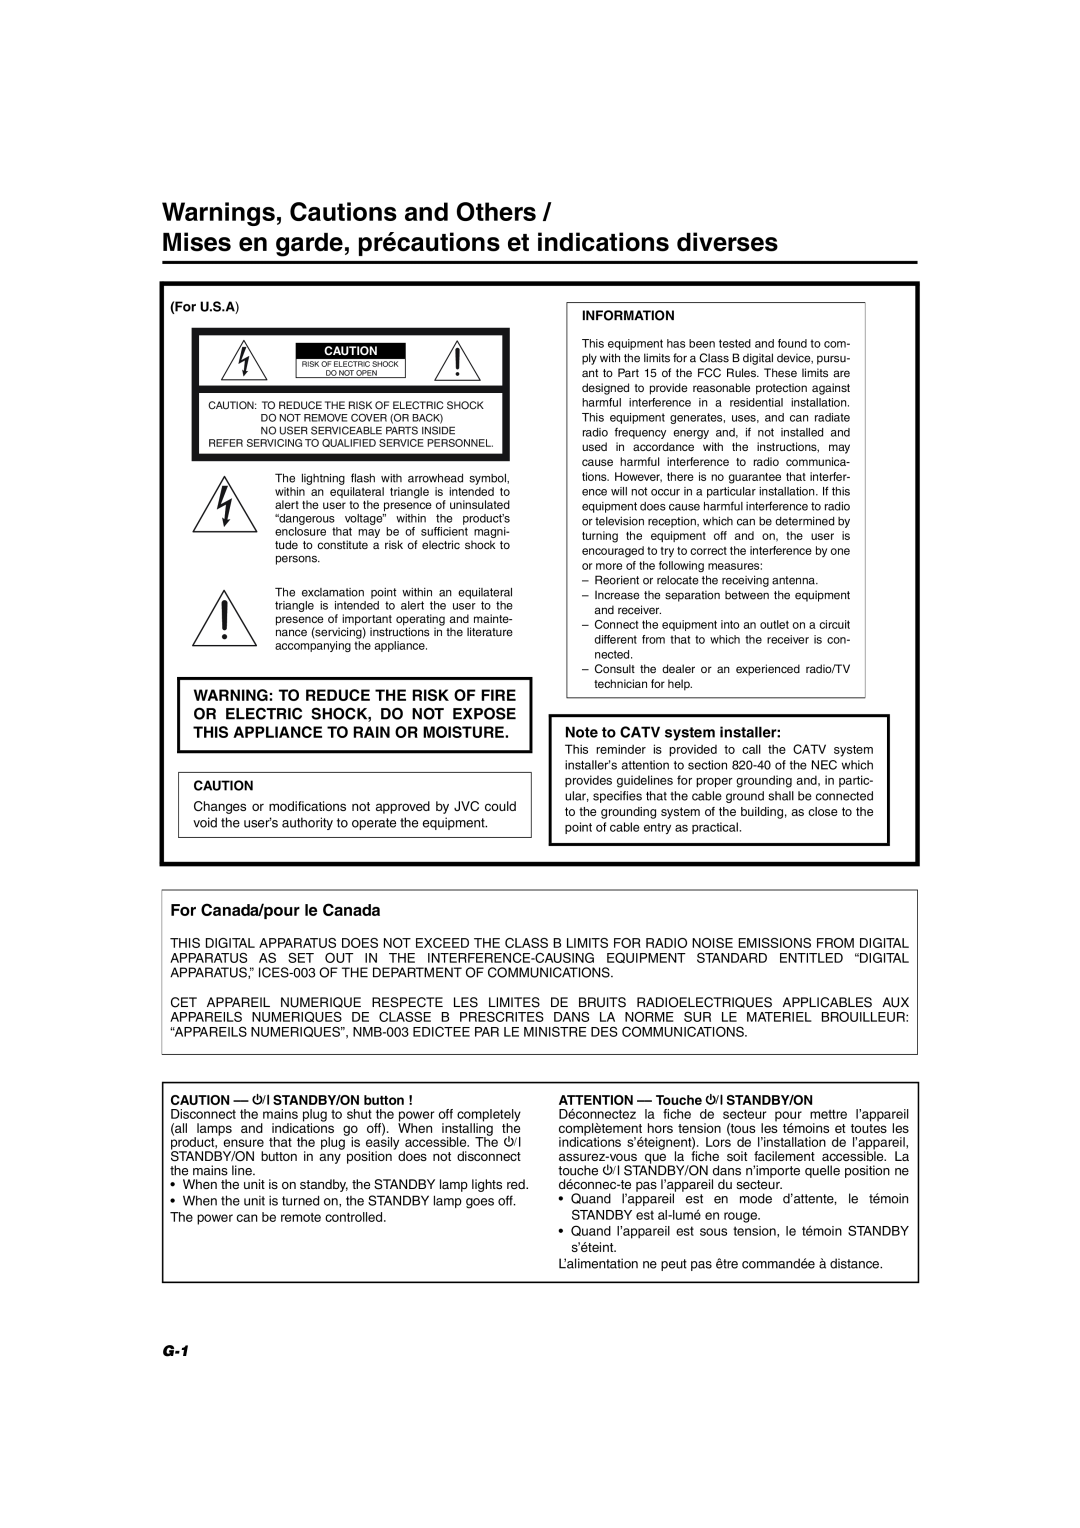 JVC MX-KC45 manual Warnings, Cautions and Others, Note to CATV system installer, For U.S.A, Information 